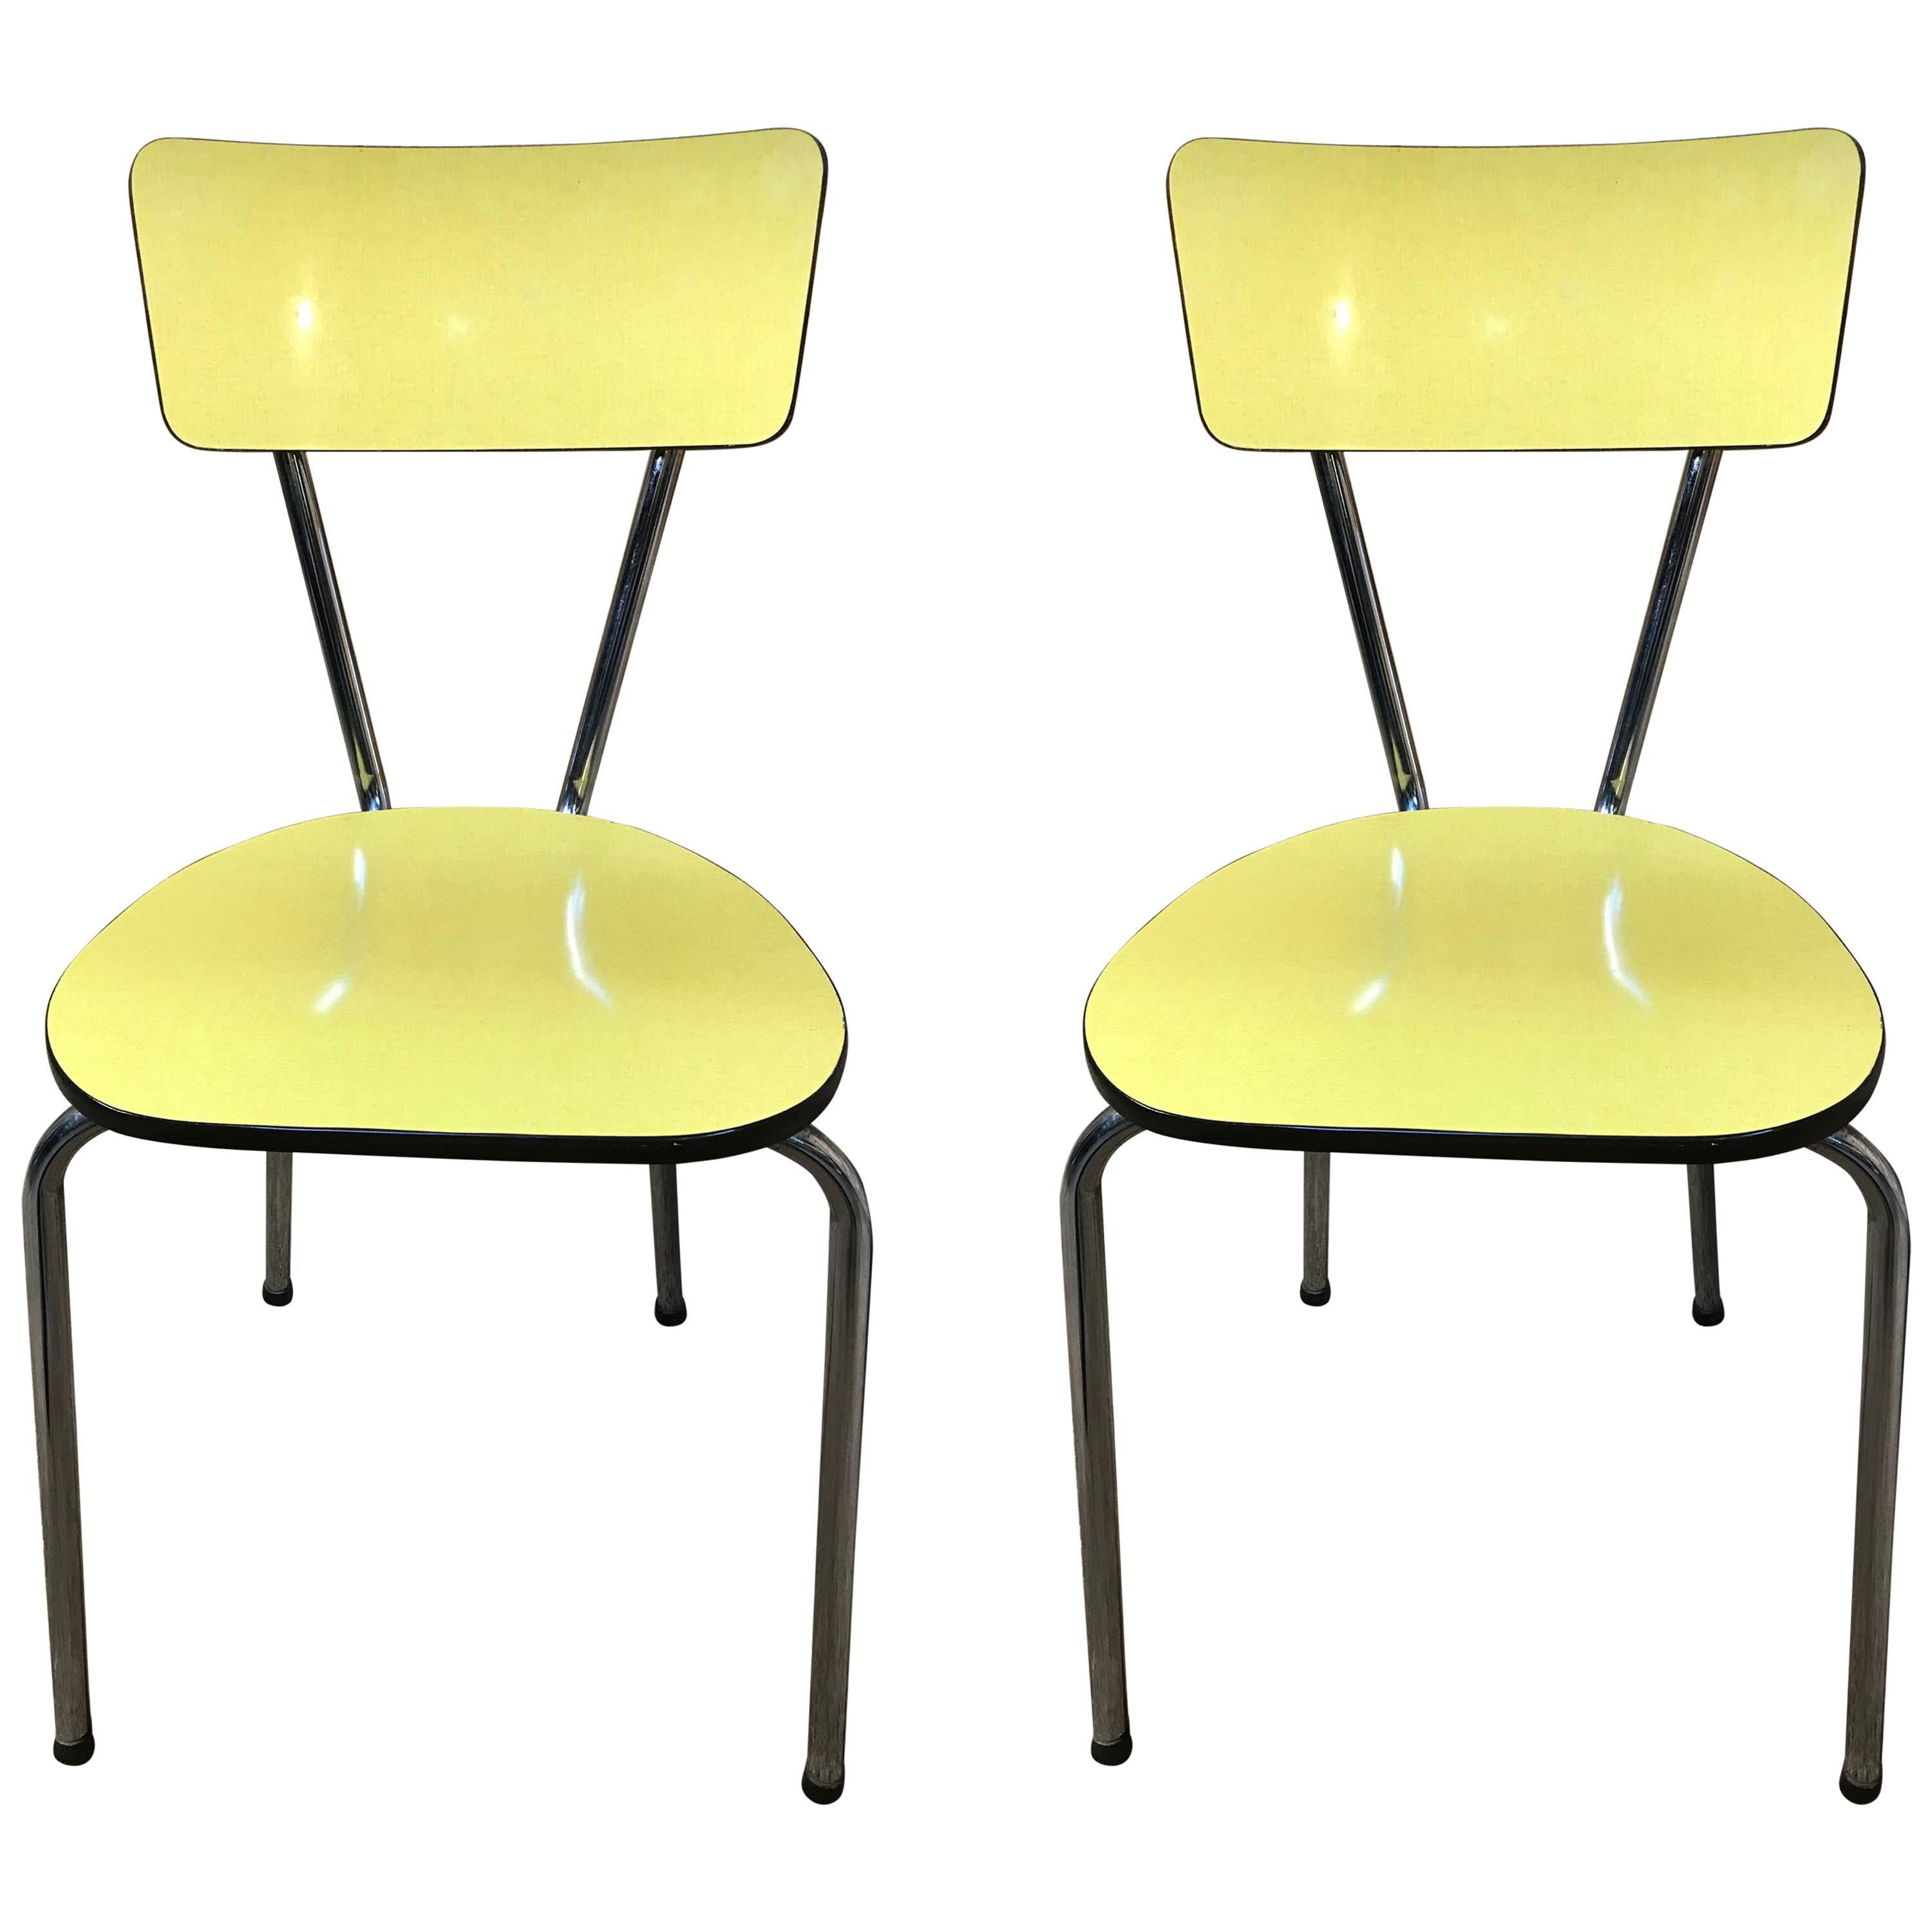 1950s Vintage Retro Yellow and Chrome Melamine Chairs For Sale